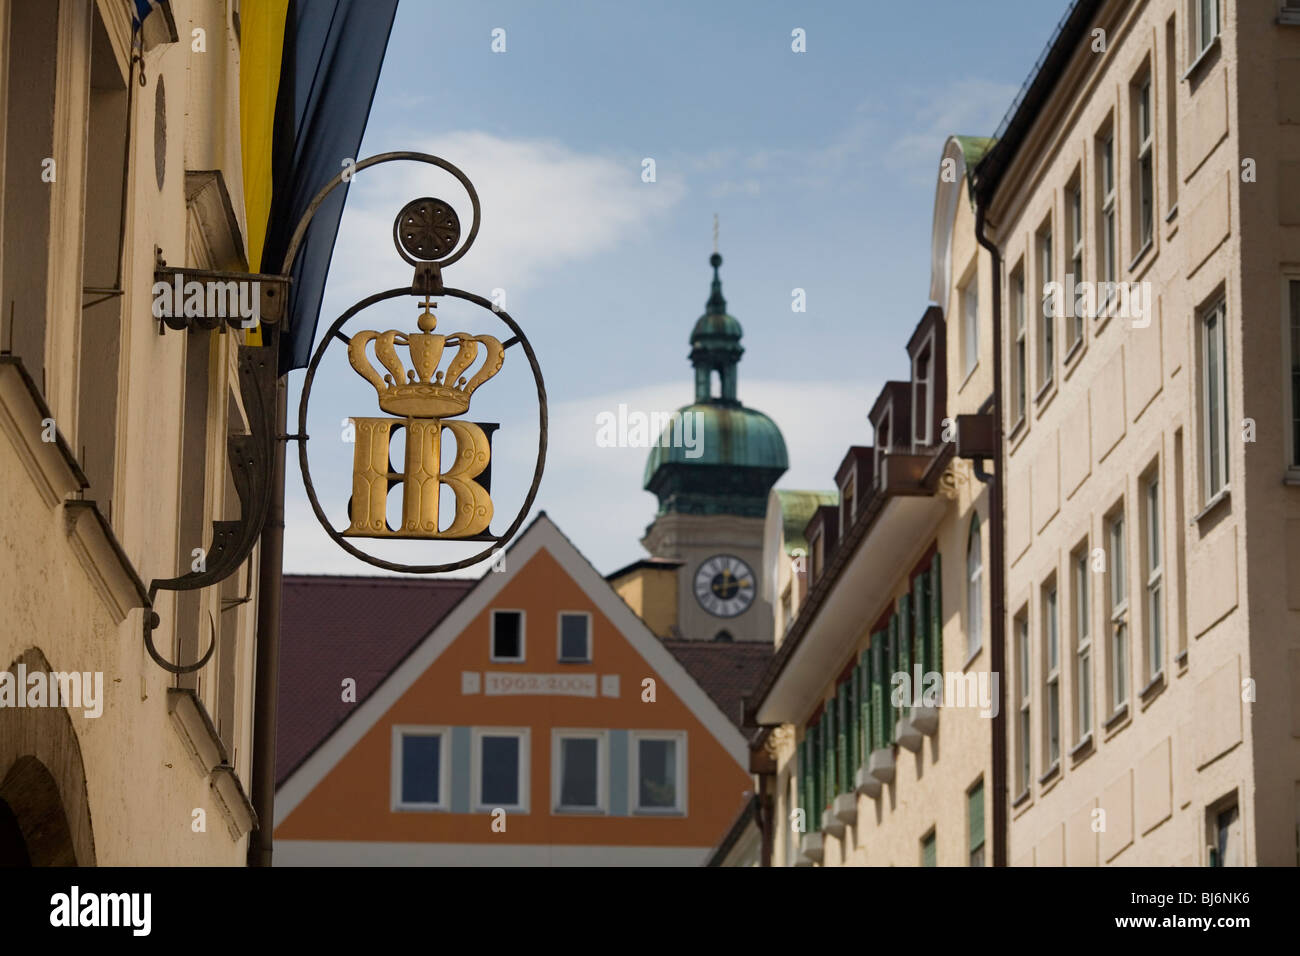 Hofbräuhaus Beer Hall and beer signs in Platzl. Munich, Germany Stock Photo